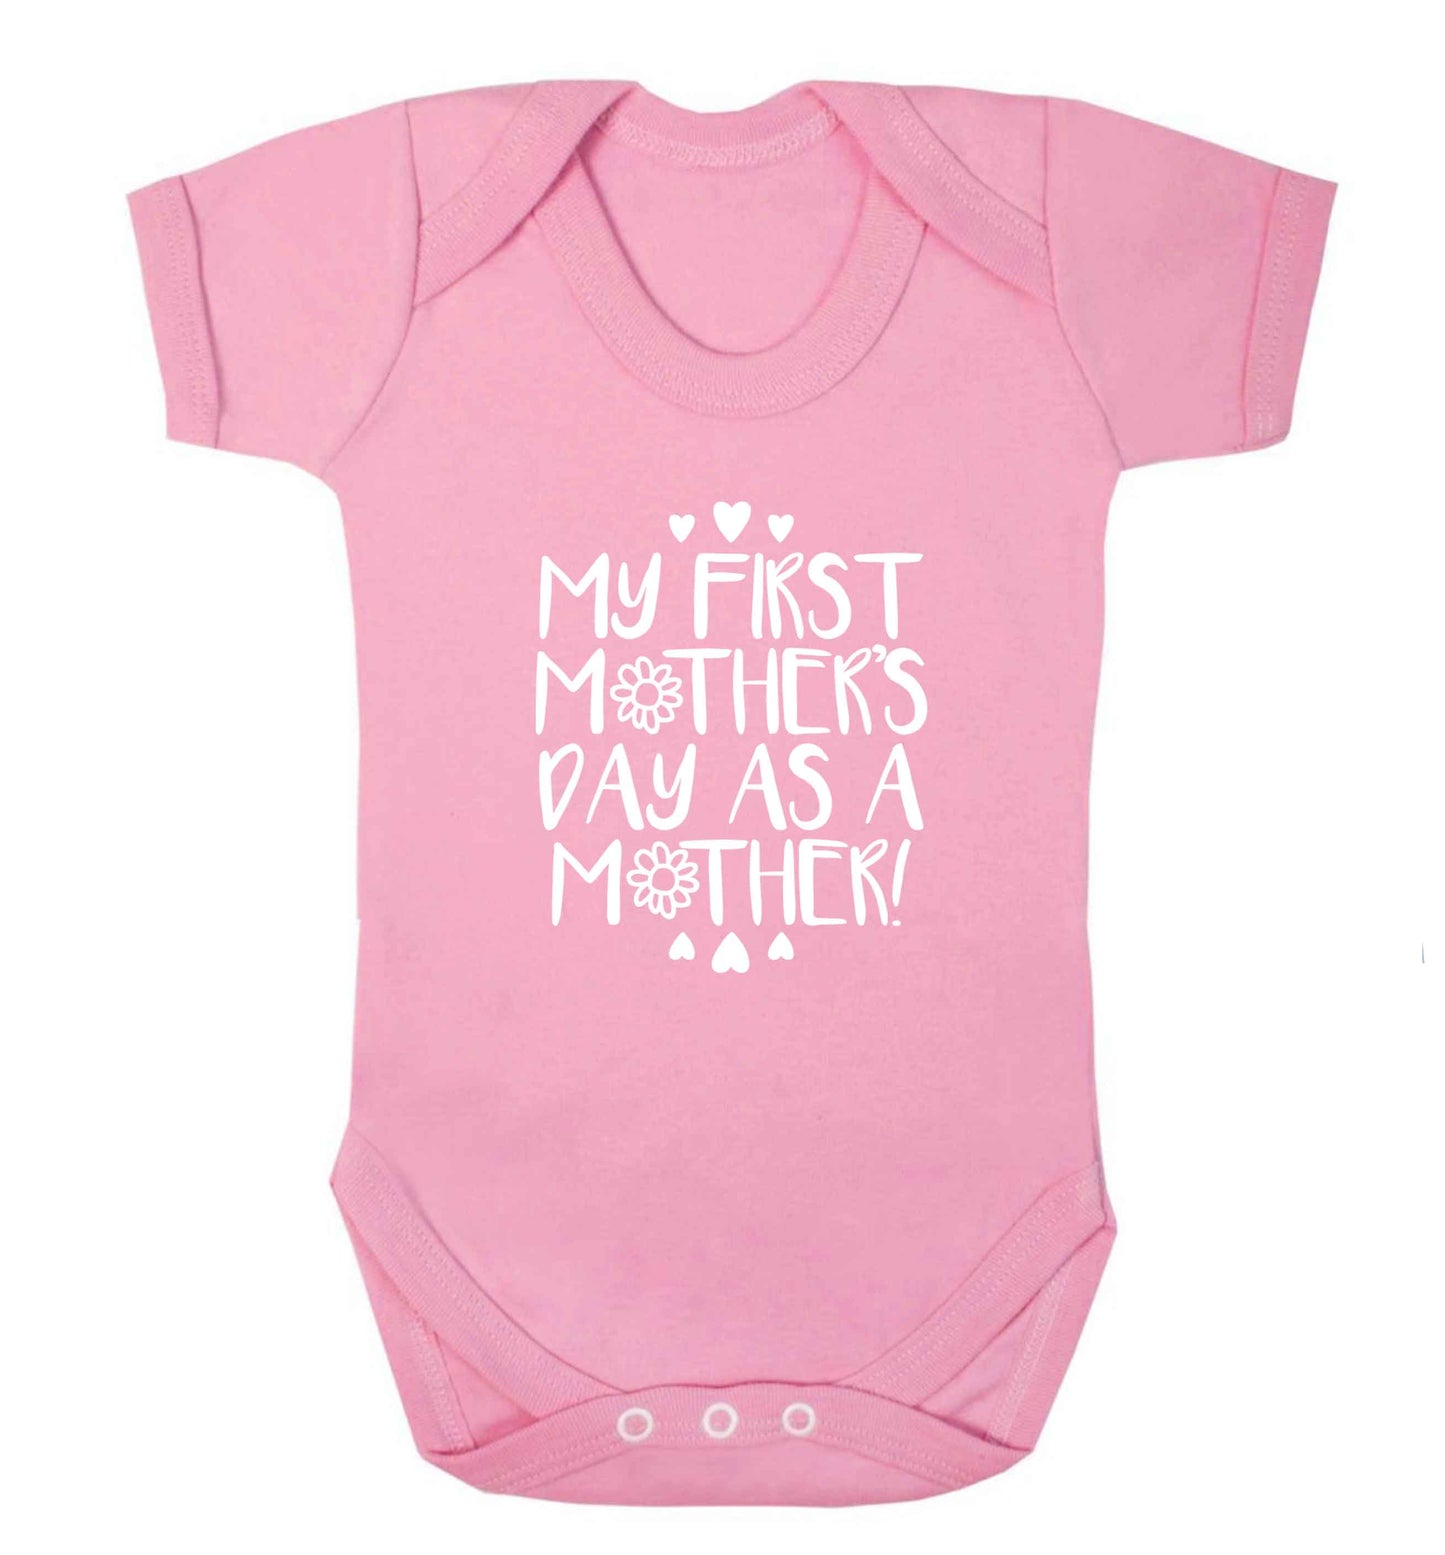 It's my first mother's day as a mother baby vest pale pink 18-24 months